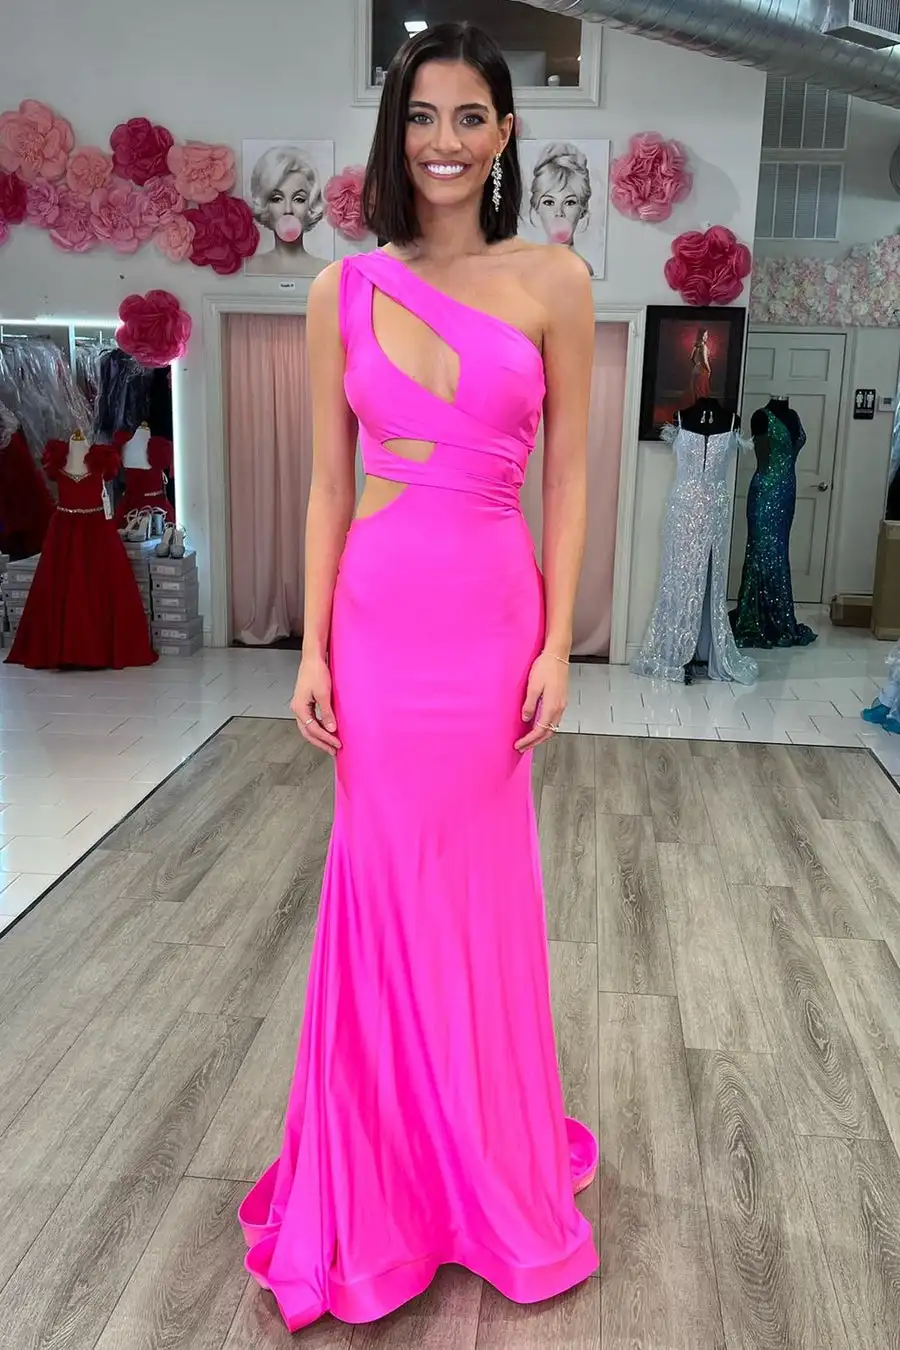 

One-Shoulder Cutout Mermaid Long Formal Prom Gown Sweep Train Wedding Party Gowns Sleeveless V-Neck Floor Length Party Dress